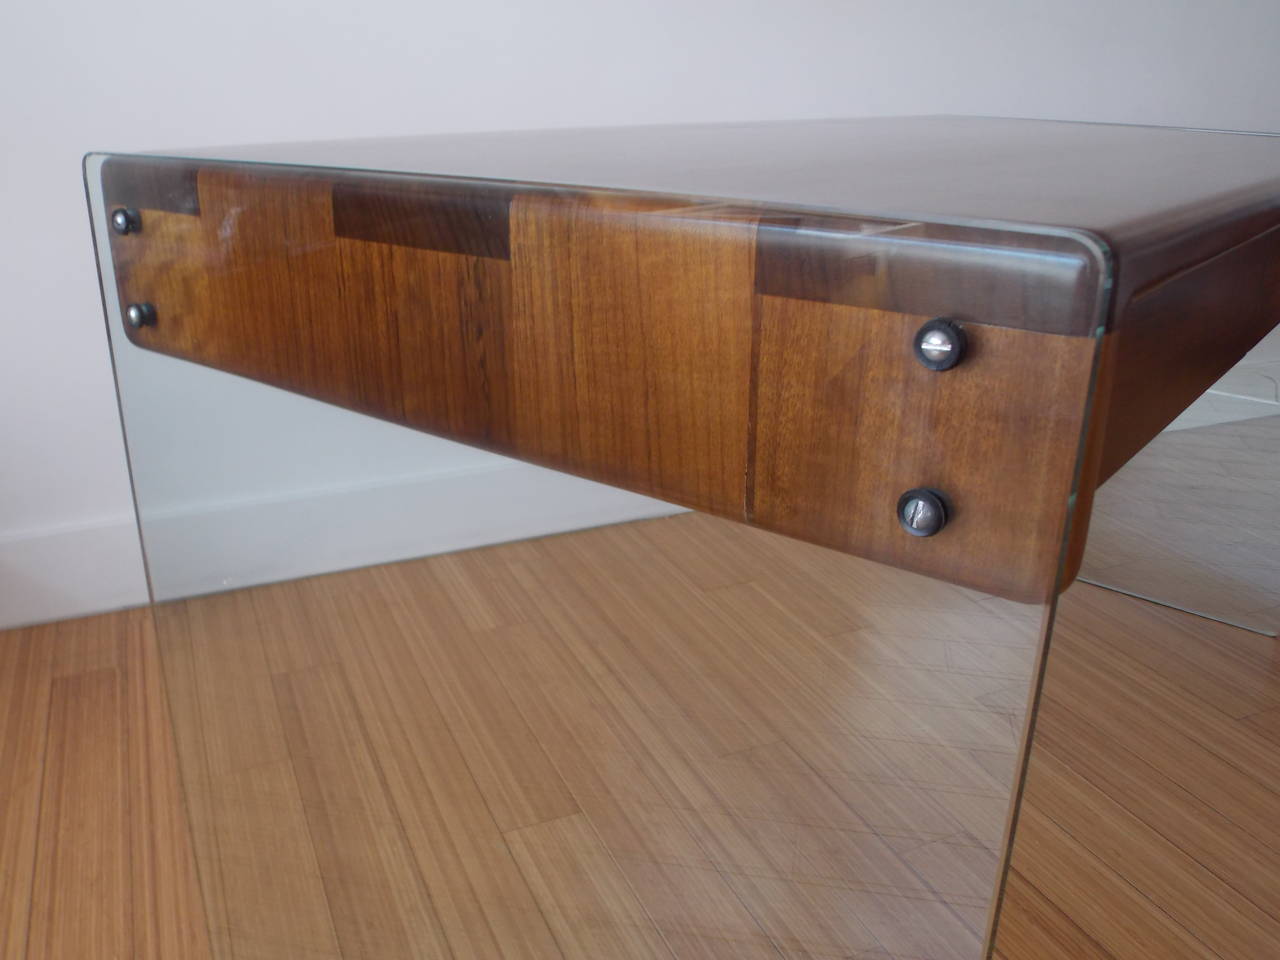 A handsome California design.
Made with shedua wood (African Walnut) and original glass side bases, with original screws.
No chips or scratches on the glass, but has some nicks around the screw holes, barely visible.
Great to use as a console as